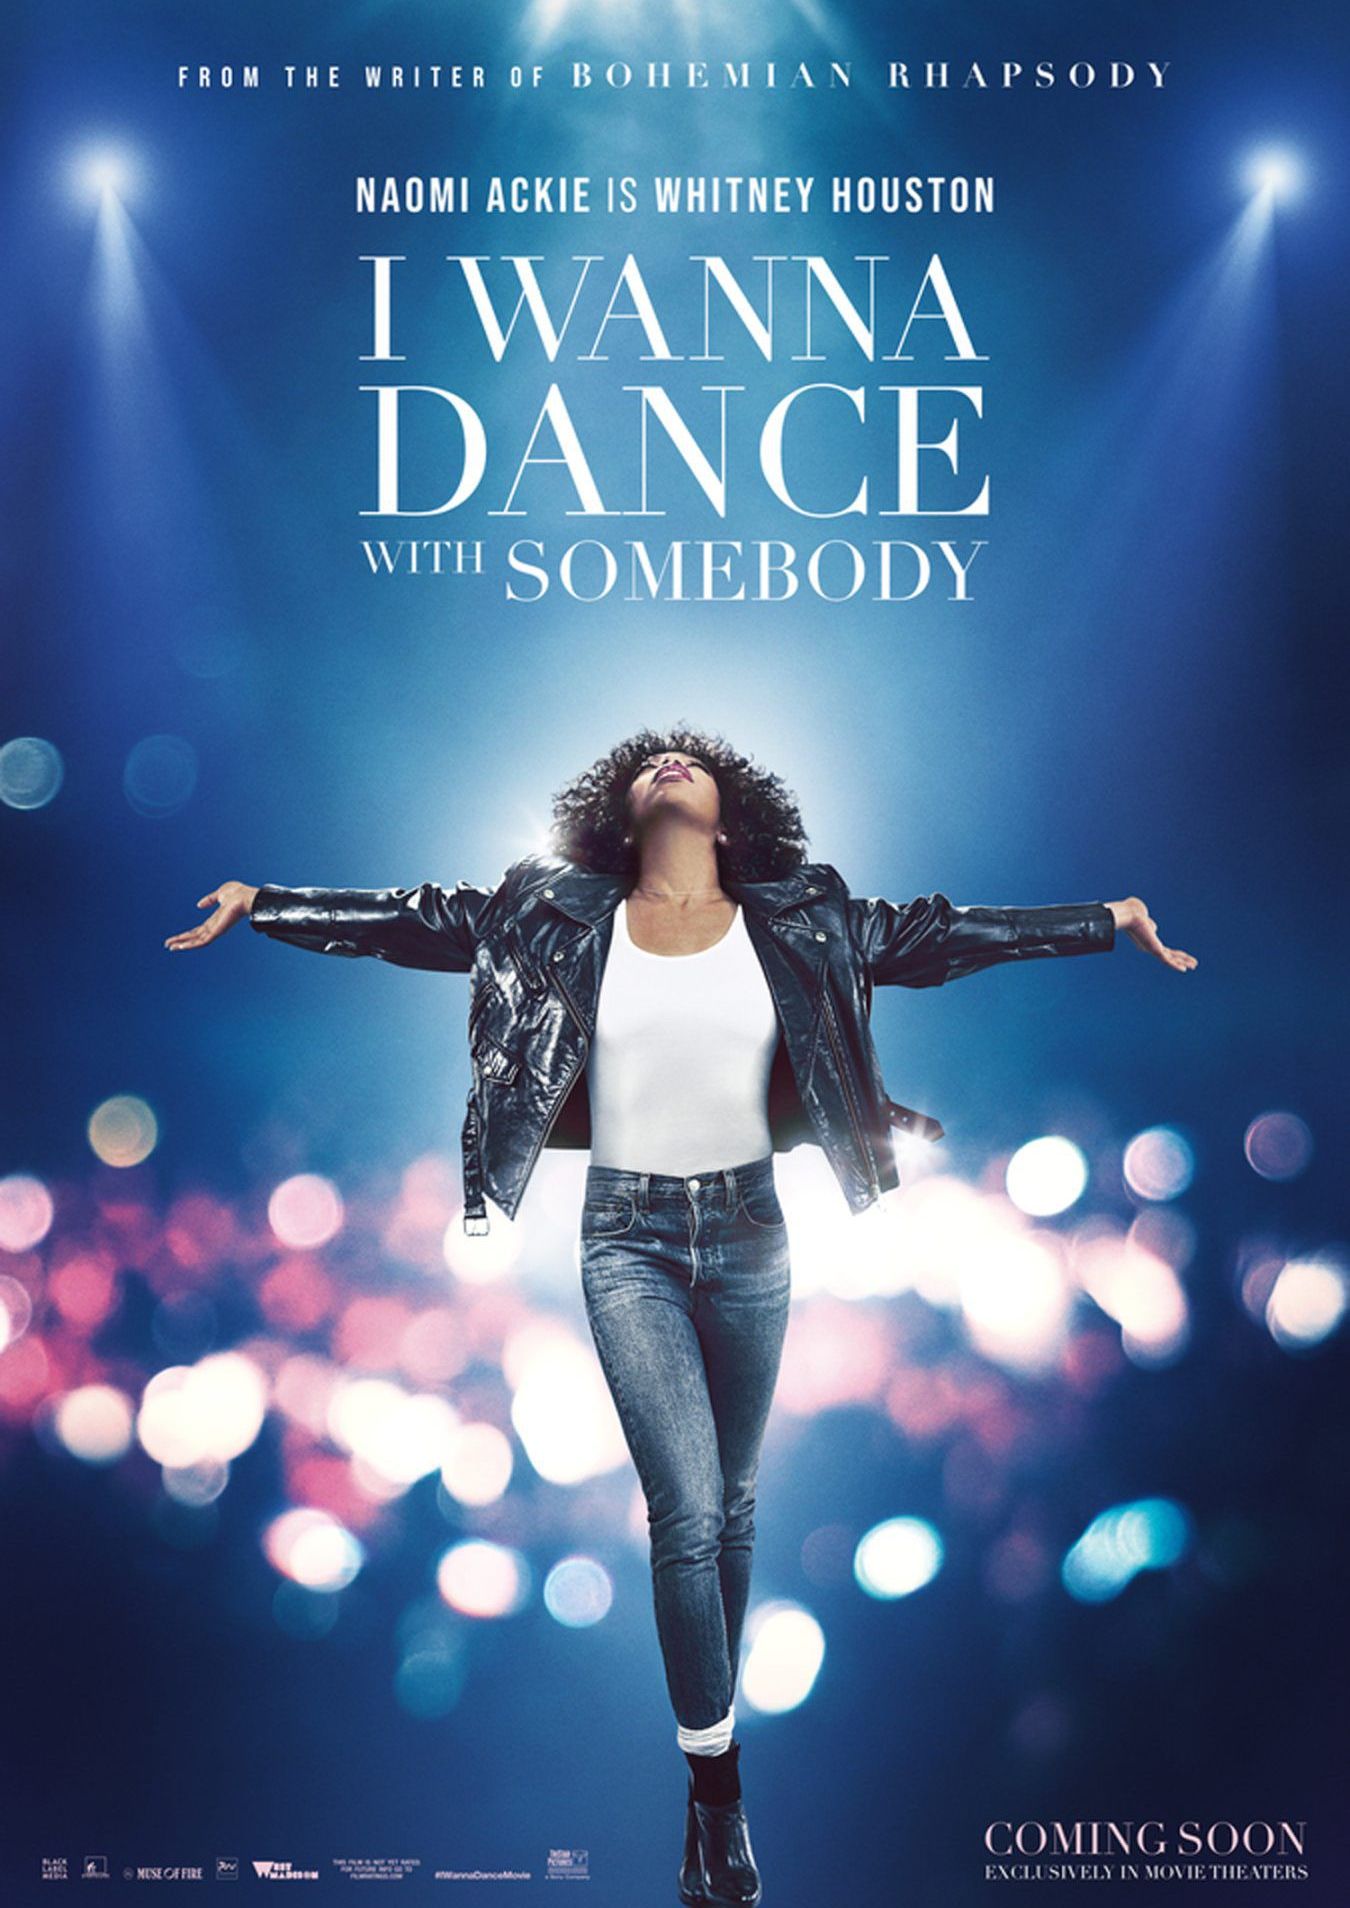 Póster oficial del lanzamiento de "I Wanna Dance With Somebody". (Sony Pictures)